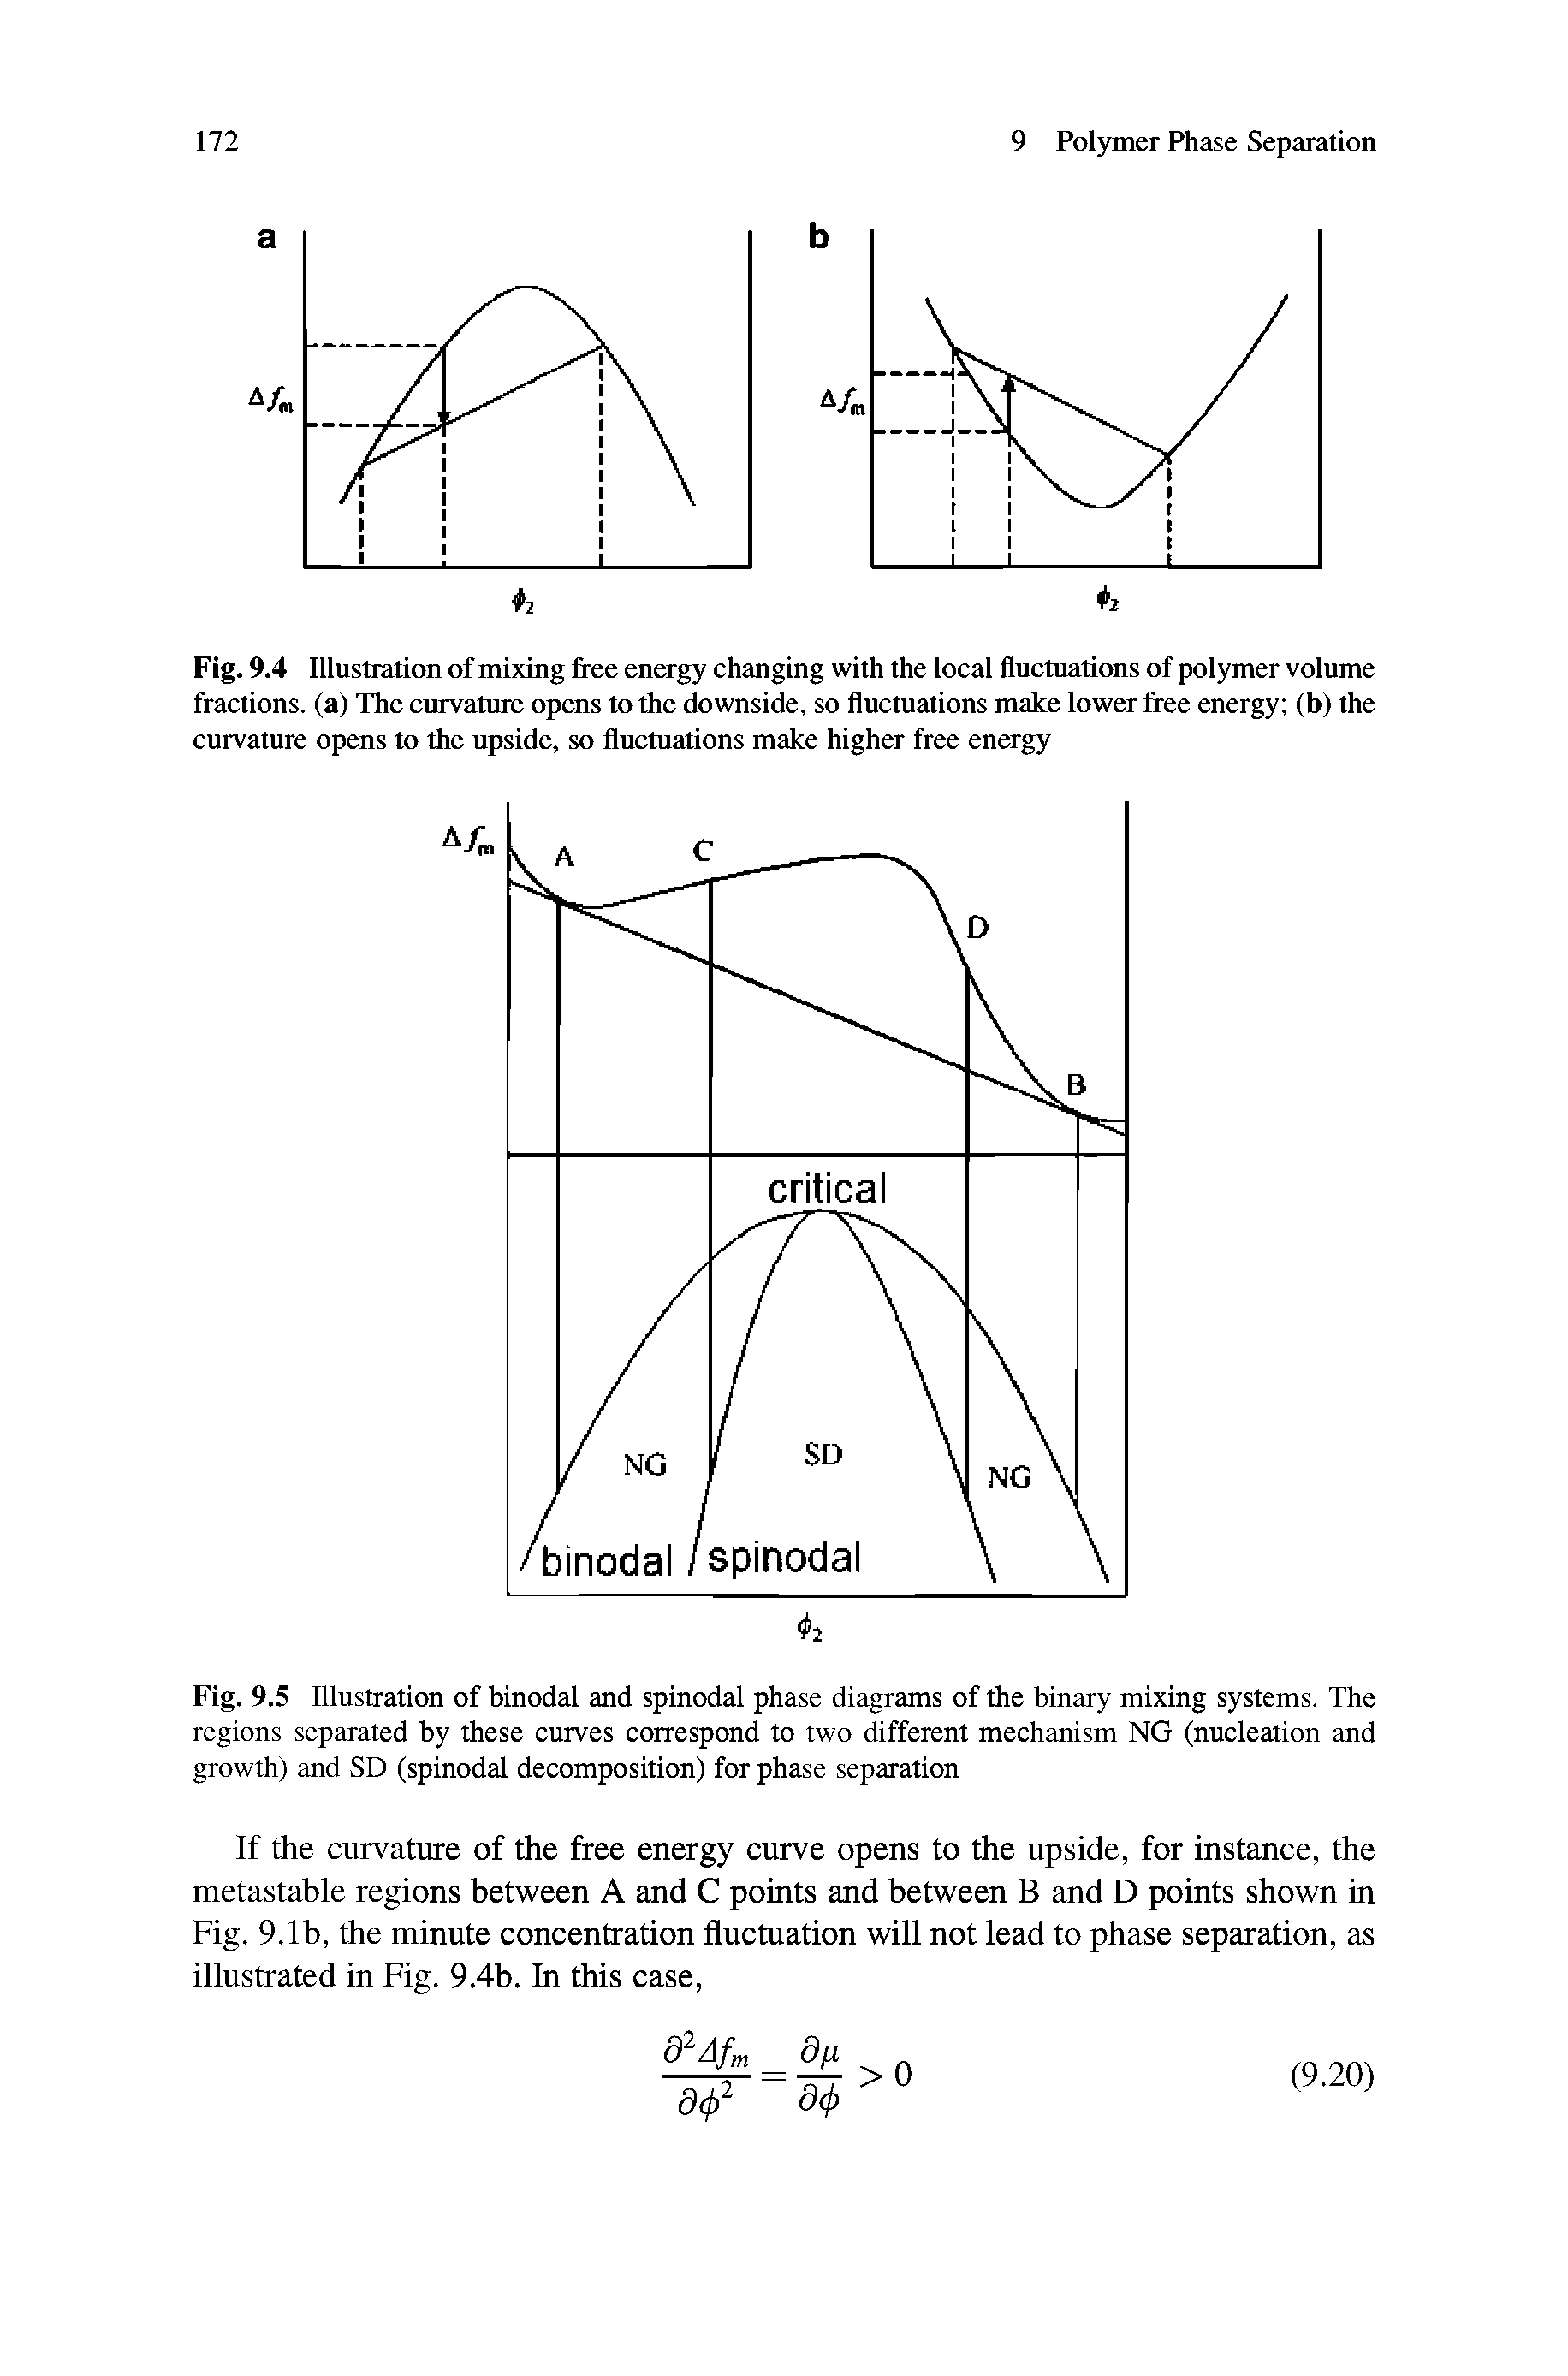 Fig. 9.4 Illustration of mixing free energy changing with the local fluctuations of polymer volume fractions, (a) The curvature opens to the downside, so fluctuations make lower free energy (b) the curvature opens to the upside, so fluctuations make higher free energy...